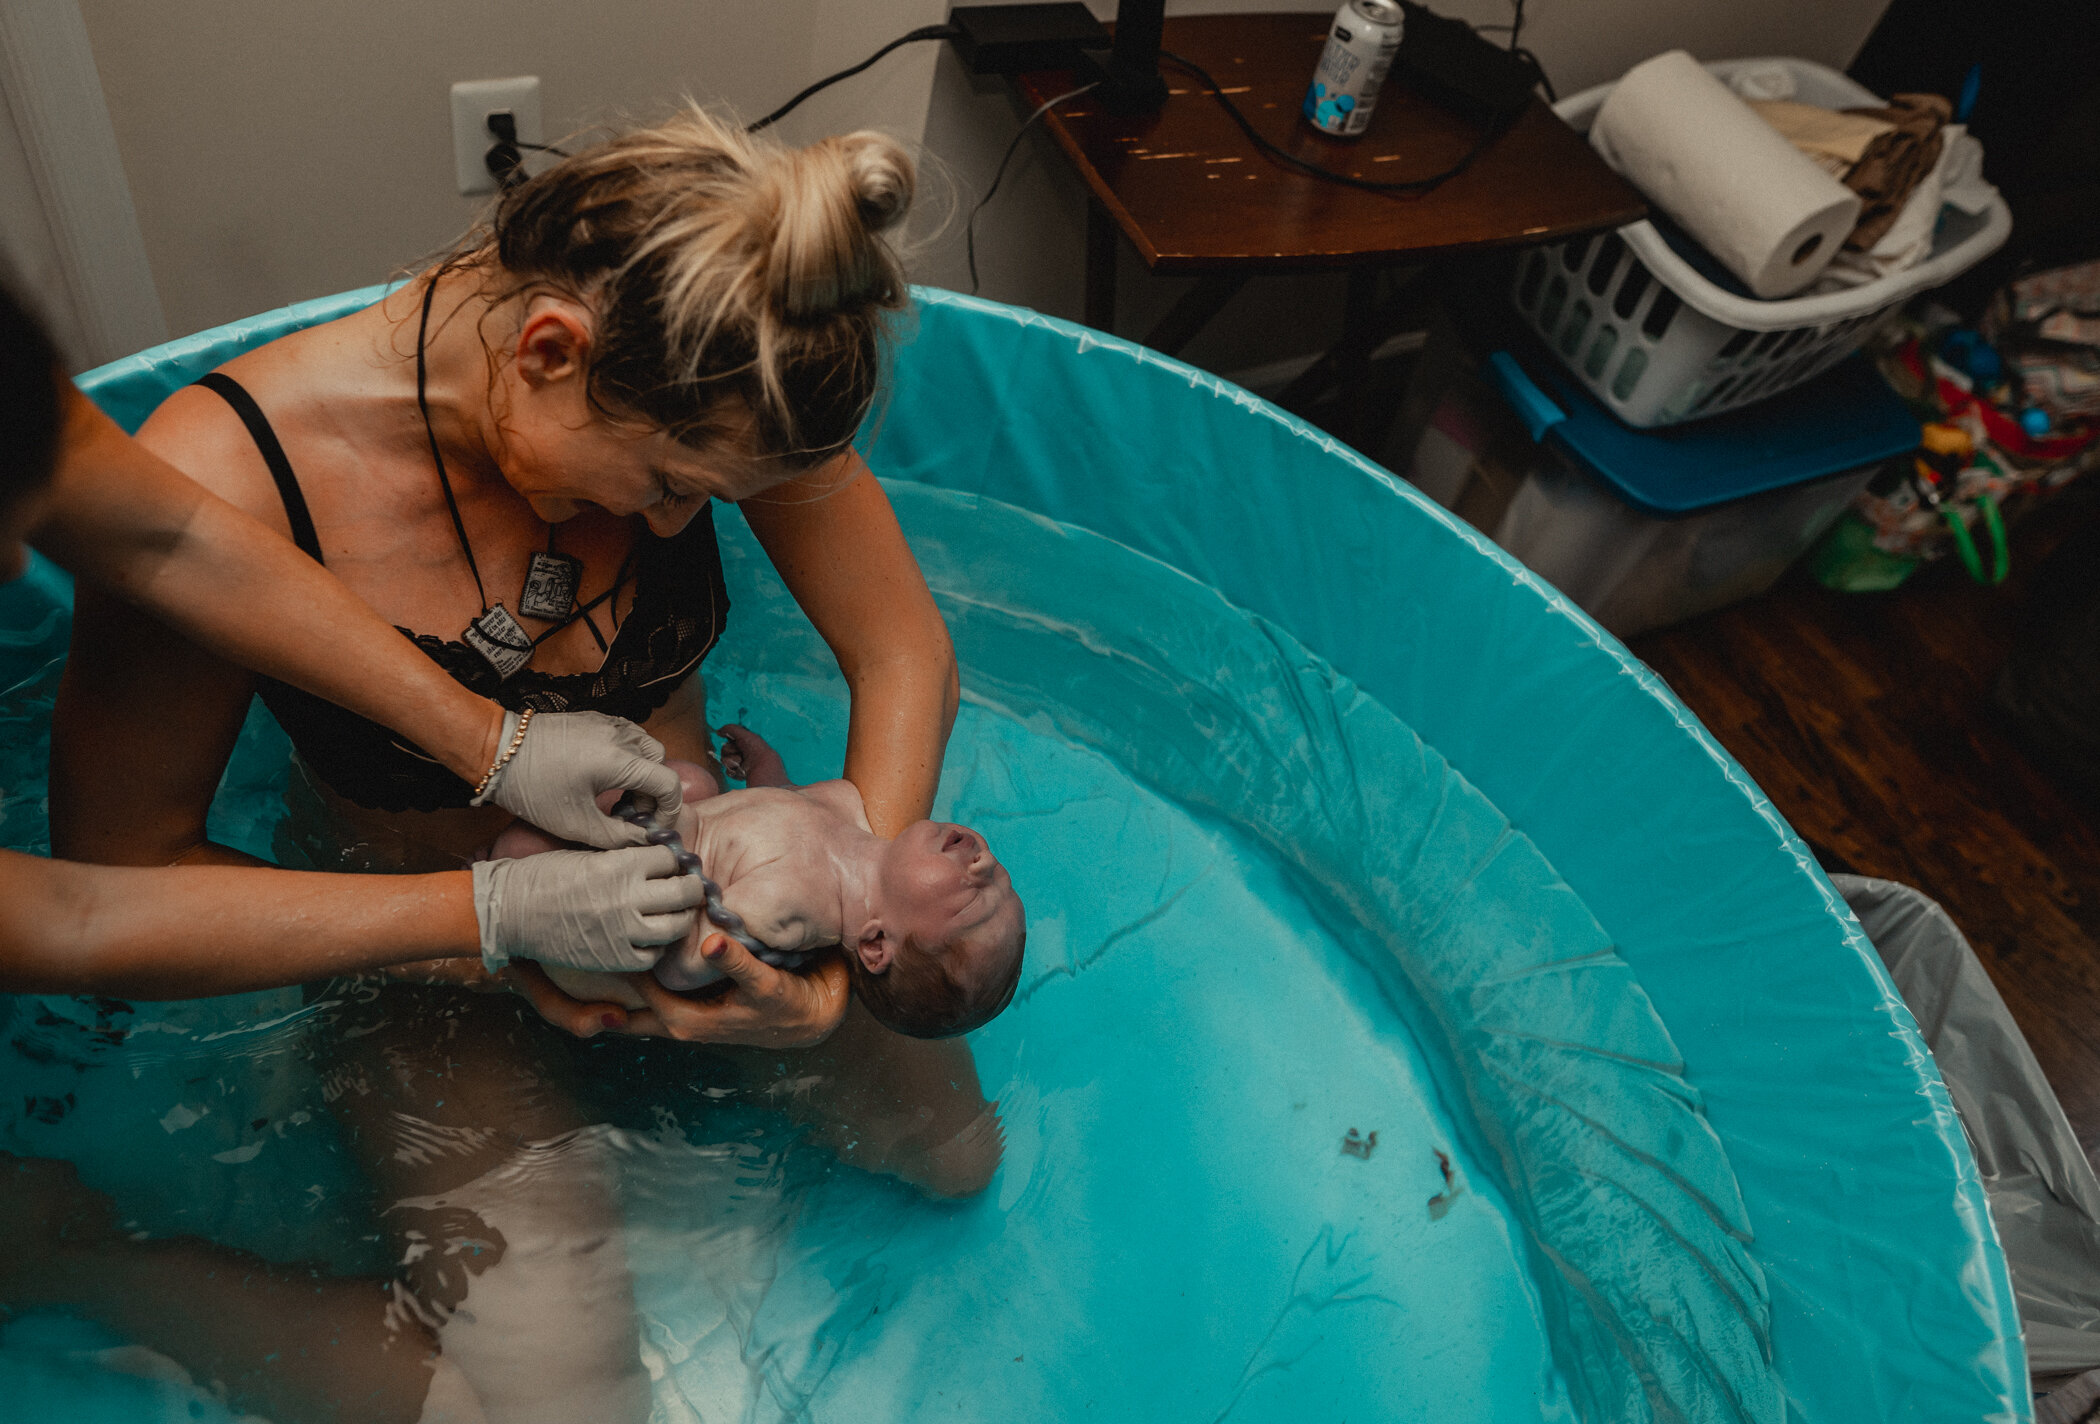 Women inspecting the gender of the baby after she delivered him in the birth tub during their Great Falls, VA home birth. Her midwife is behind her helping out with the nuchal cord